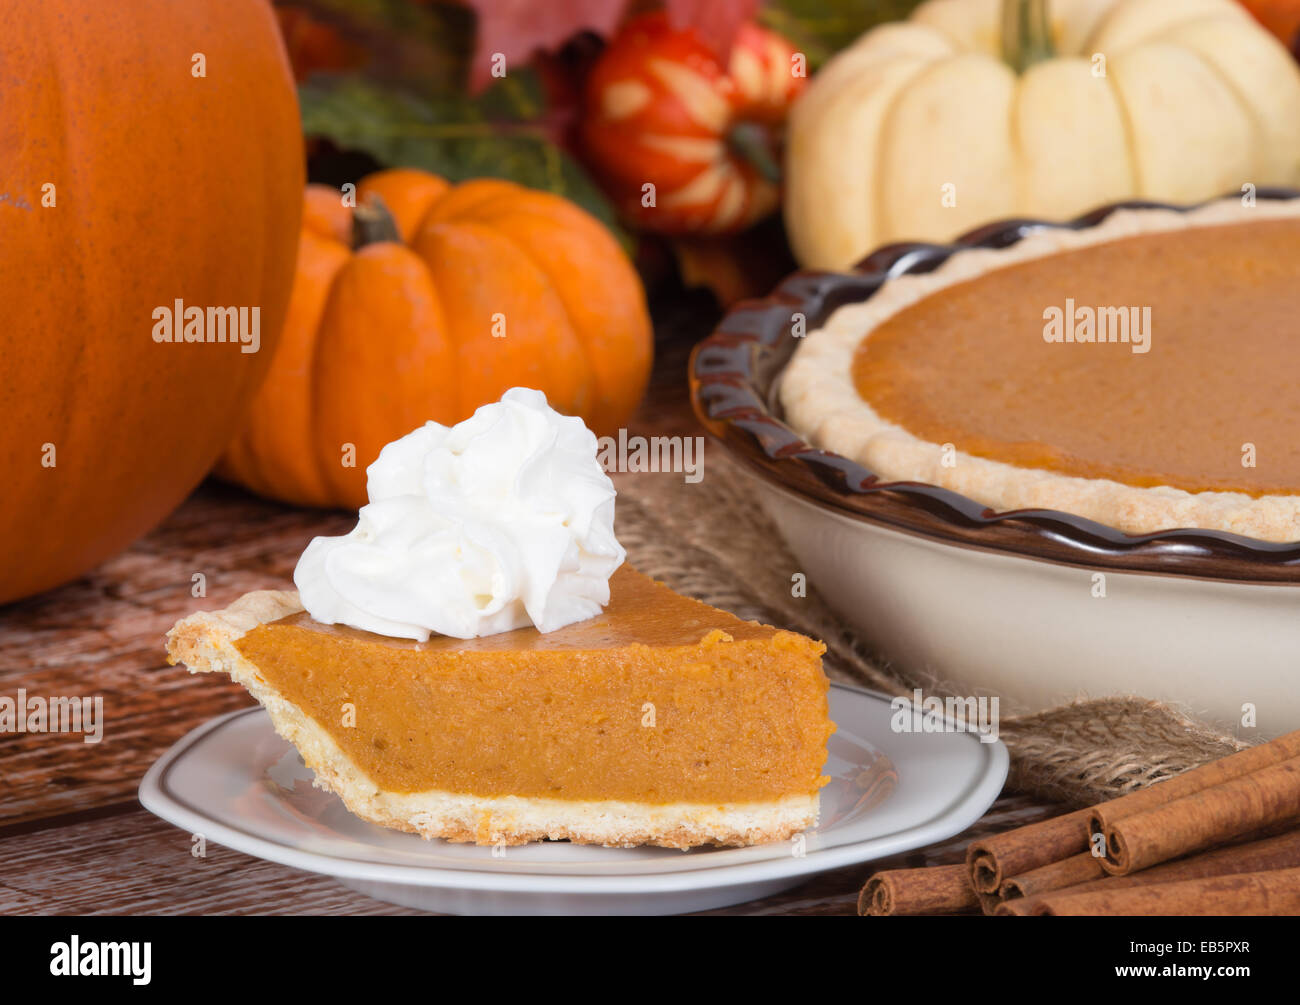 Slice of a pumpkin pie with whipped cream on wooden table. Pie and pumpkins on the background. Stock Photo